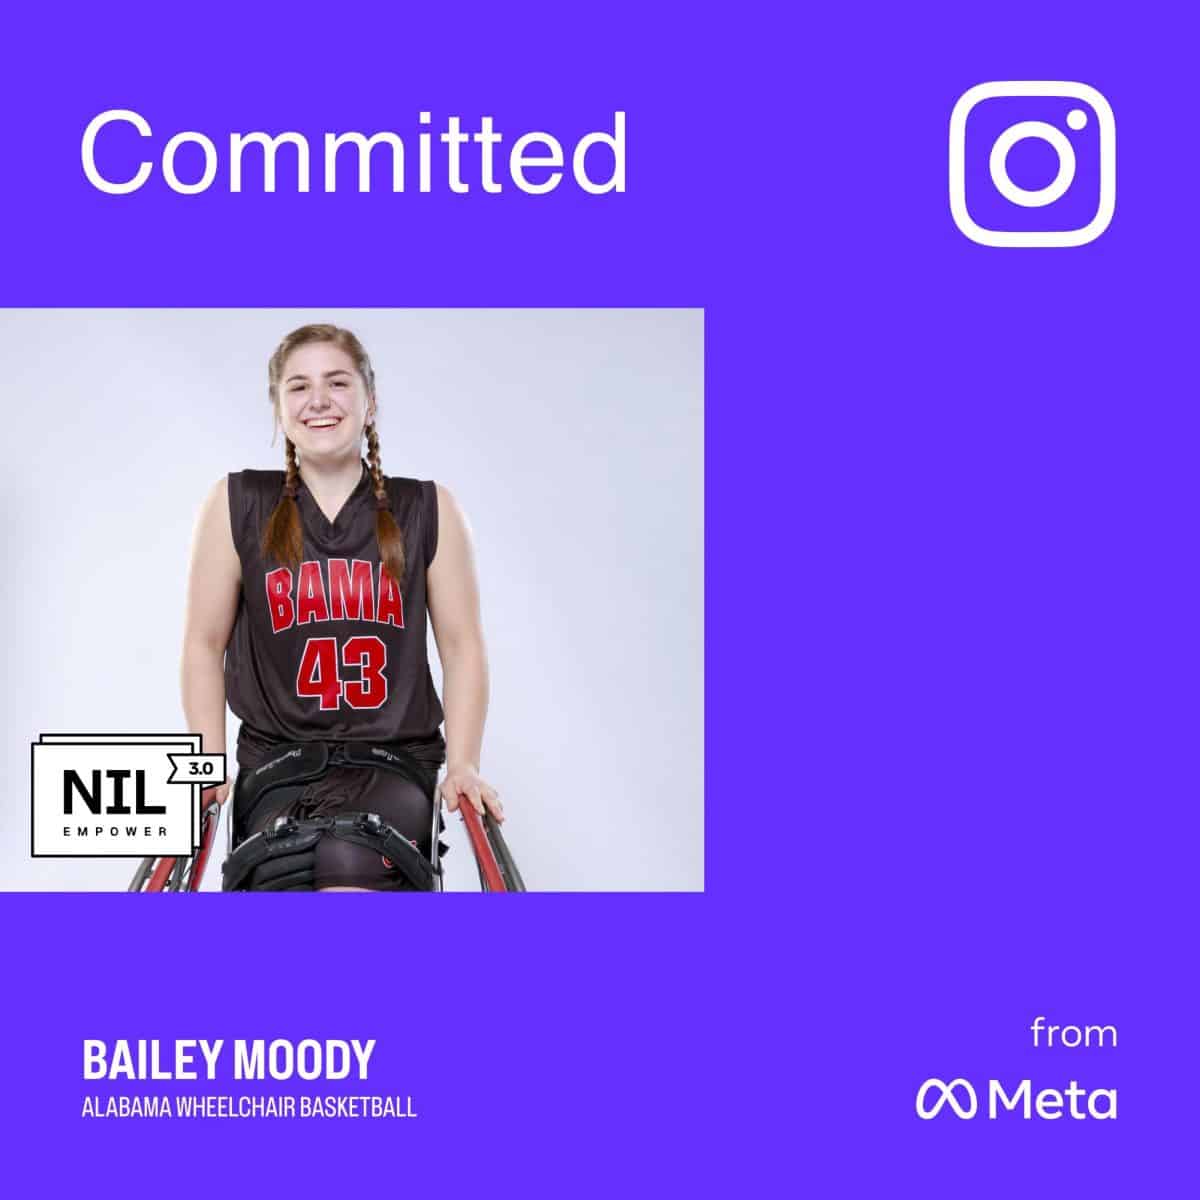 Bailey+Moody+announcement+post+for+her+partnership+with+Meta%E2%80%99s+NIL+Empower+3.0+program.